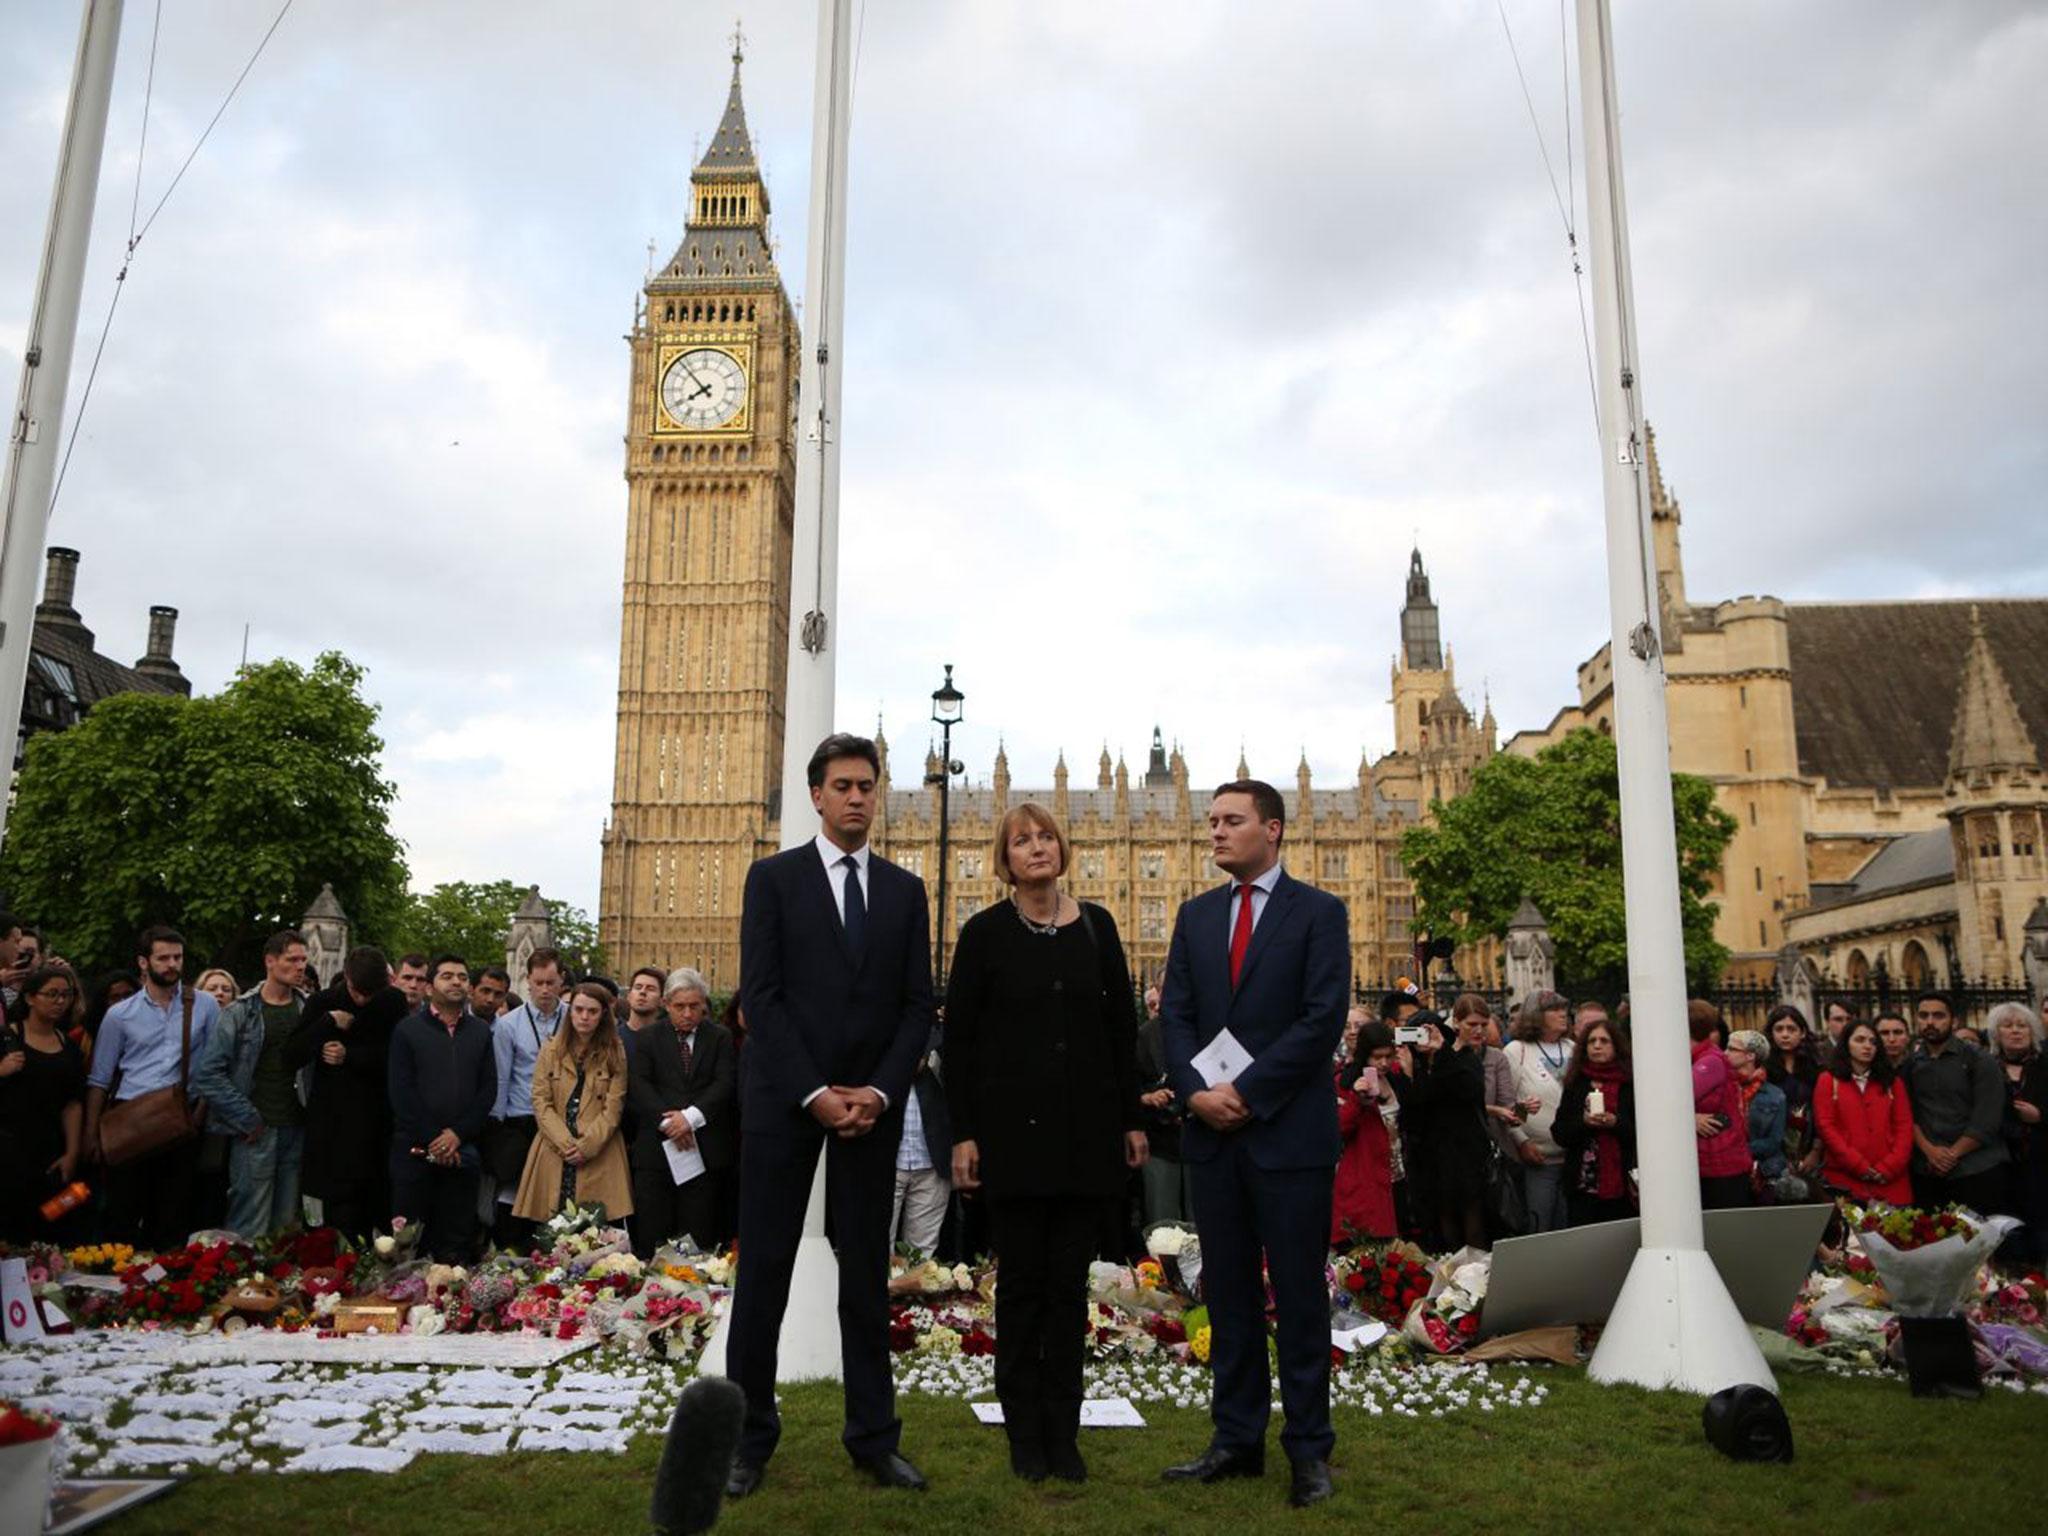 Former Labour Leader Ed Miliband, former deputy Leader of the Labour Party Harriet Harman and Labour MP for Ilford North Wes Streeting attend a vigil in memory of Labour MP Jo Cox on Parliament Square